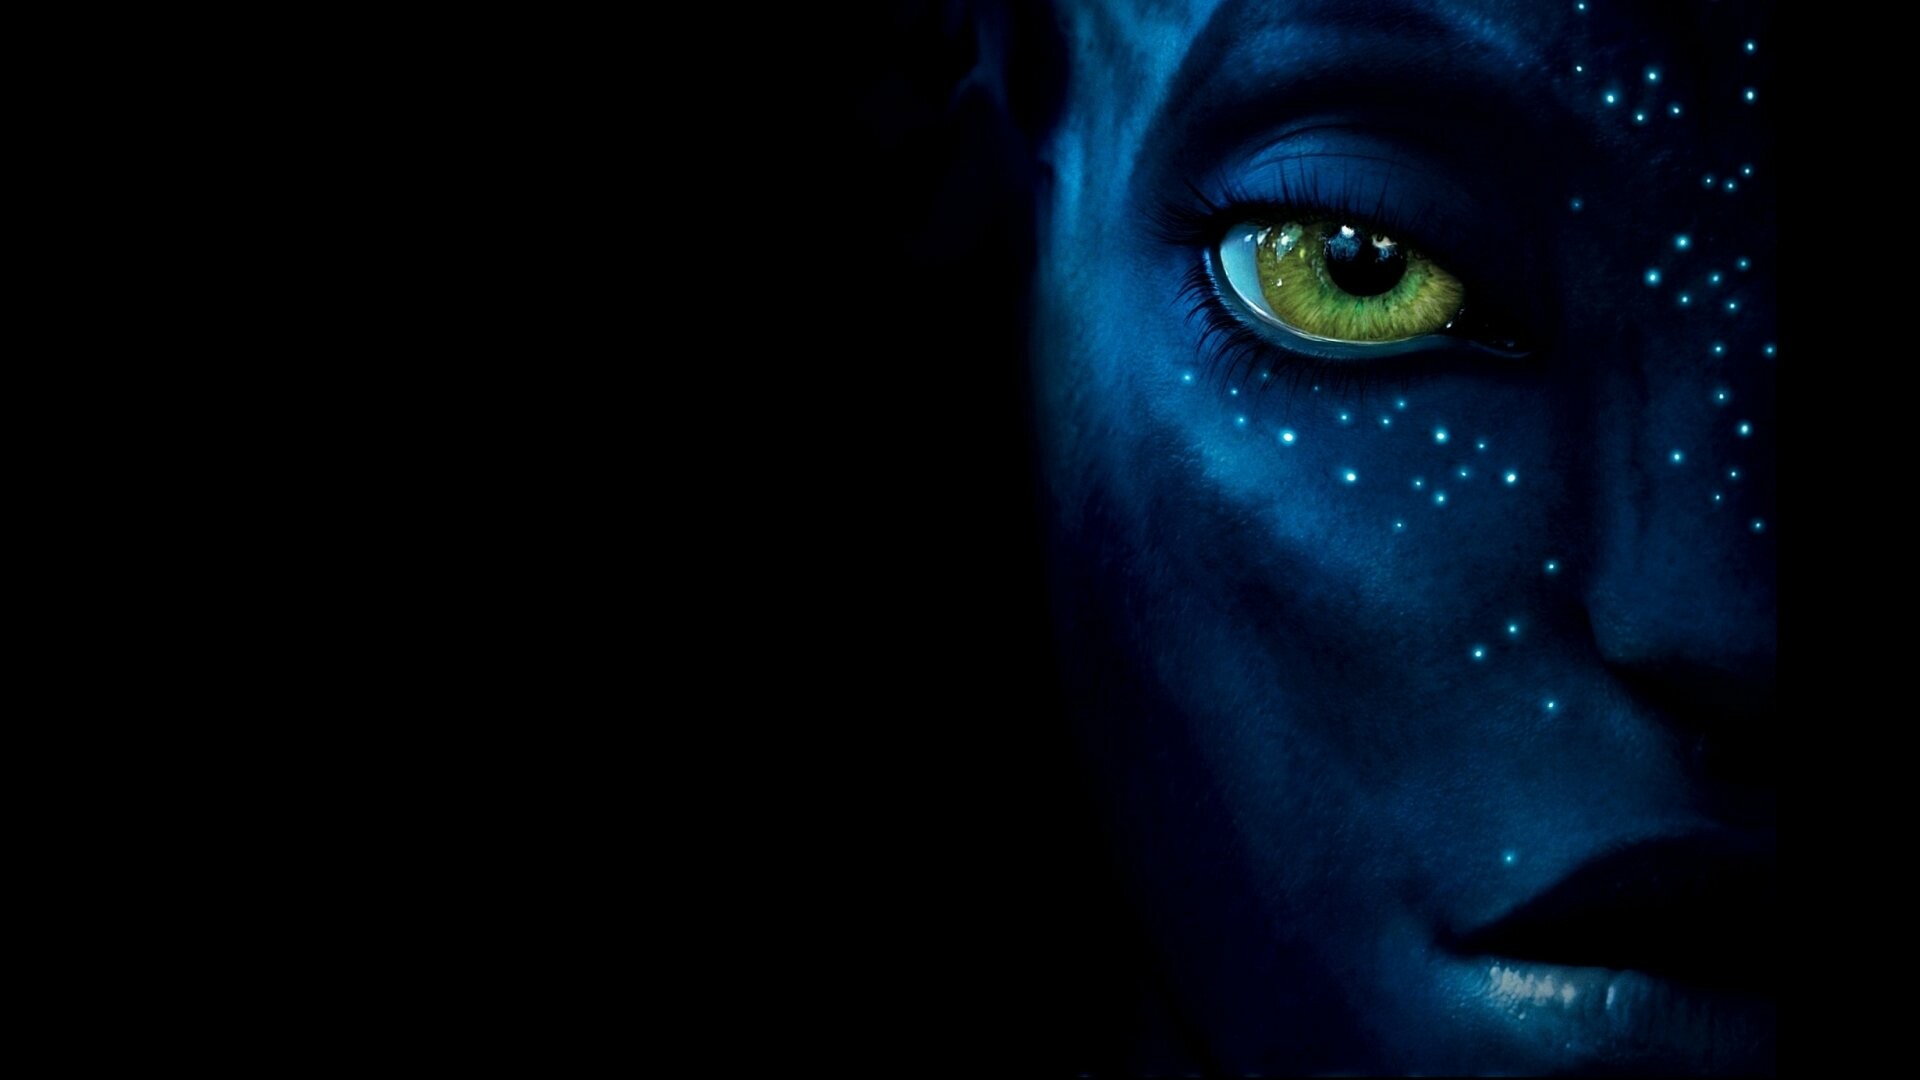 Avatar: The film won the British Academy of Film and Television Arts award for Production Design and Special Visual Effects and was nominated for six others, including Best Film and Director. 1920x1080 Full HD Background.